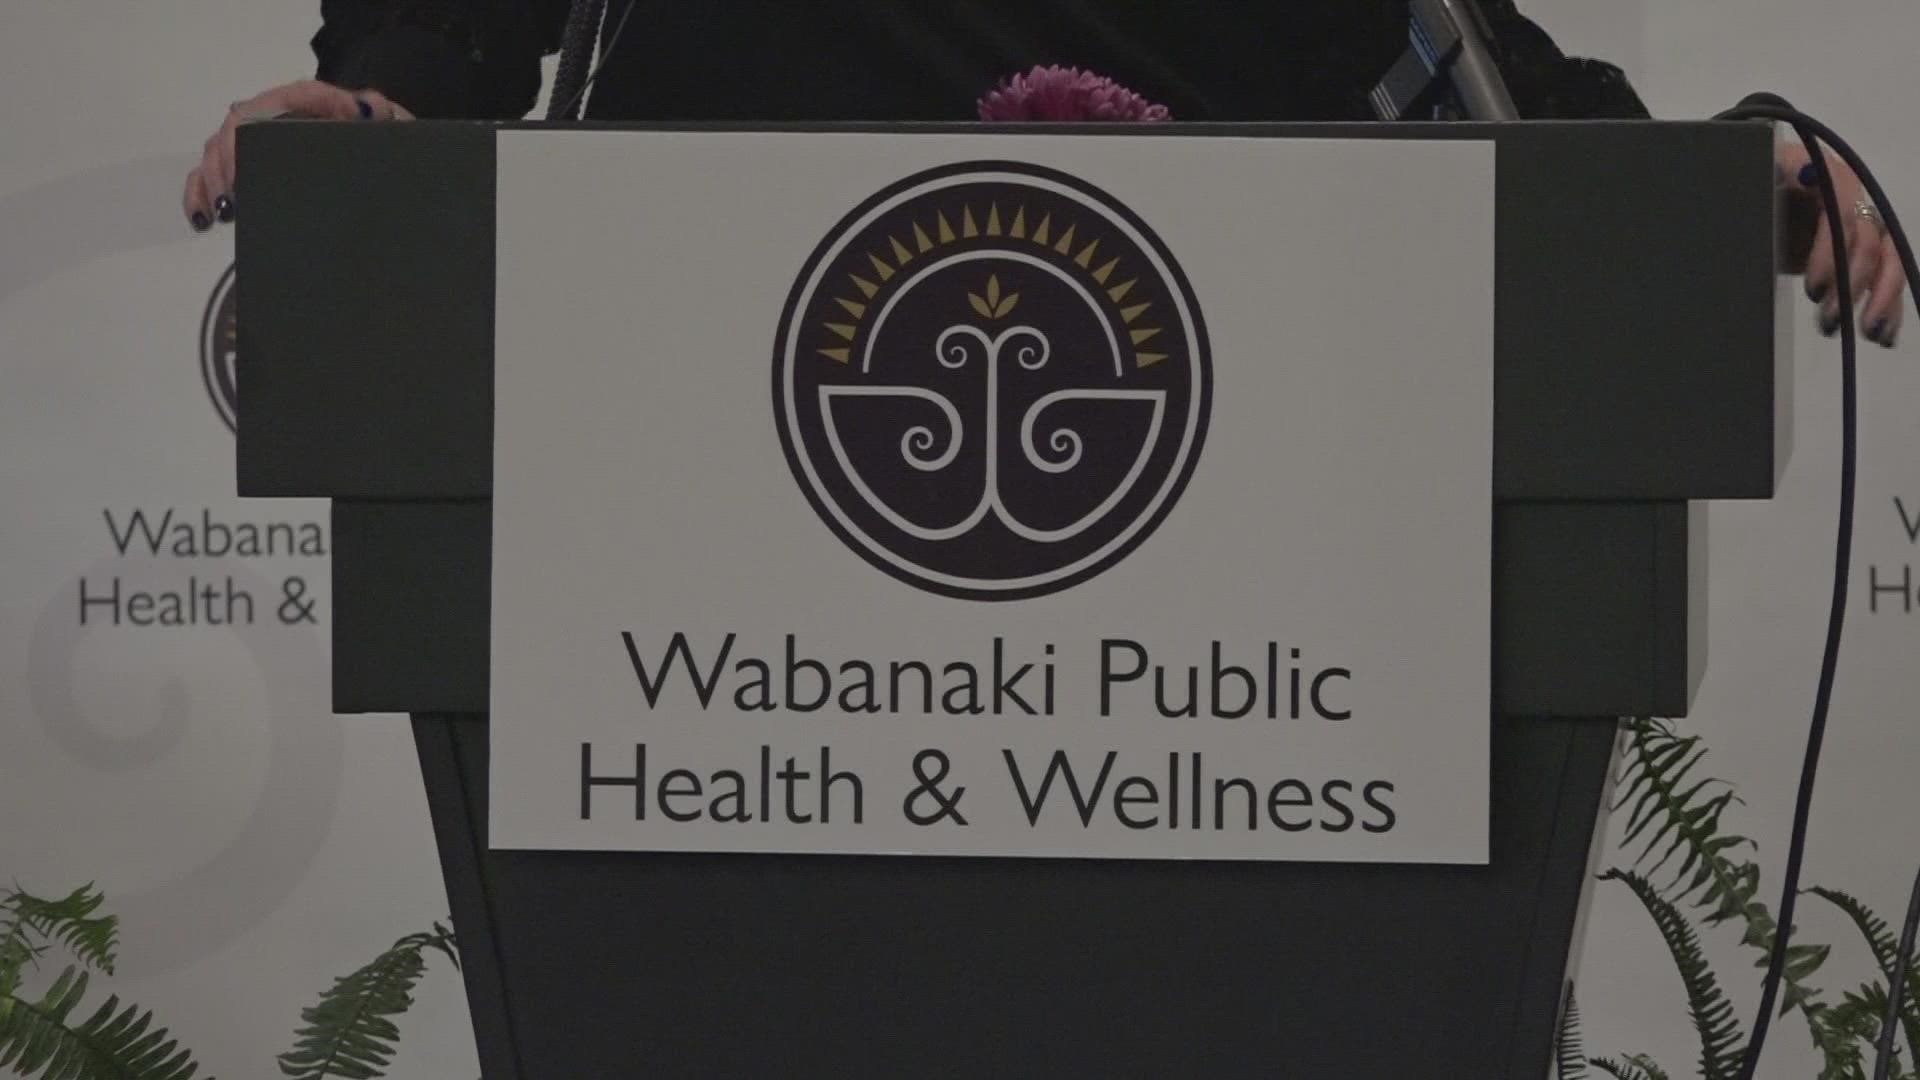 The organization said the money will go toward supporting the center in continuing to address regional health care issues.